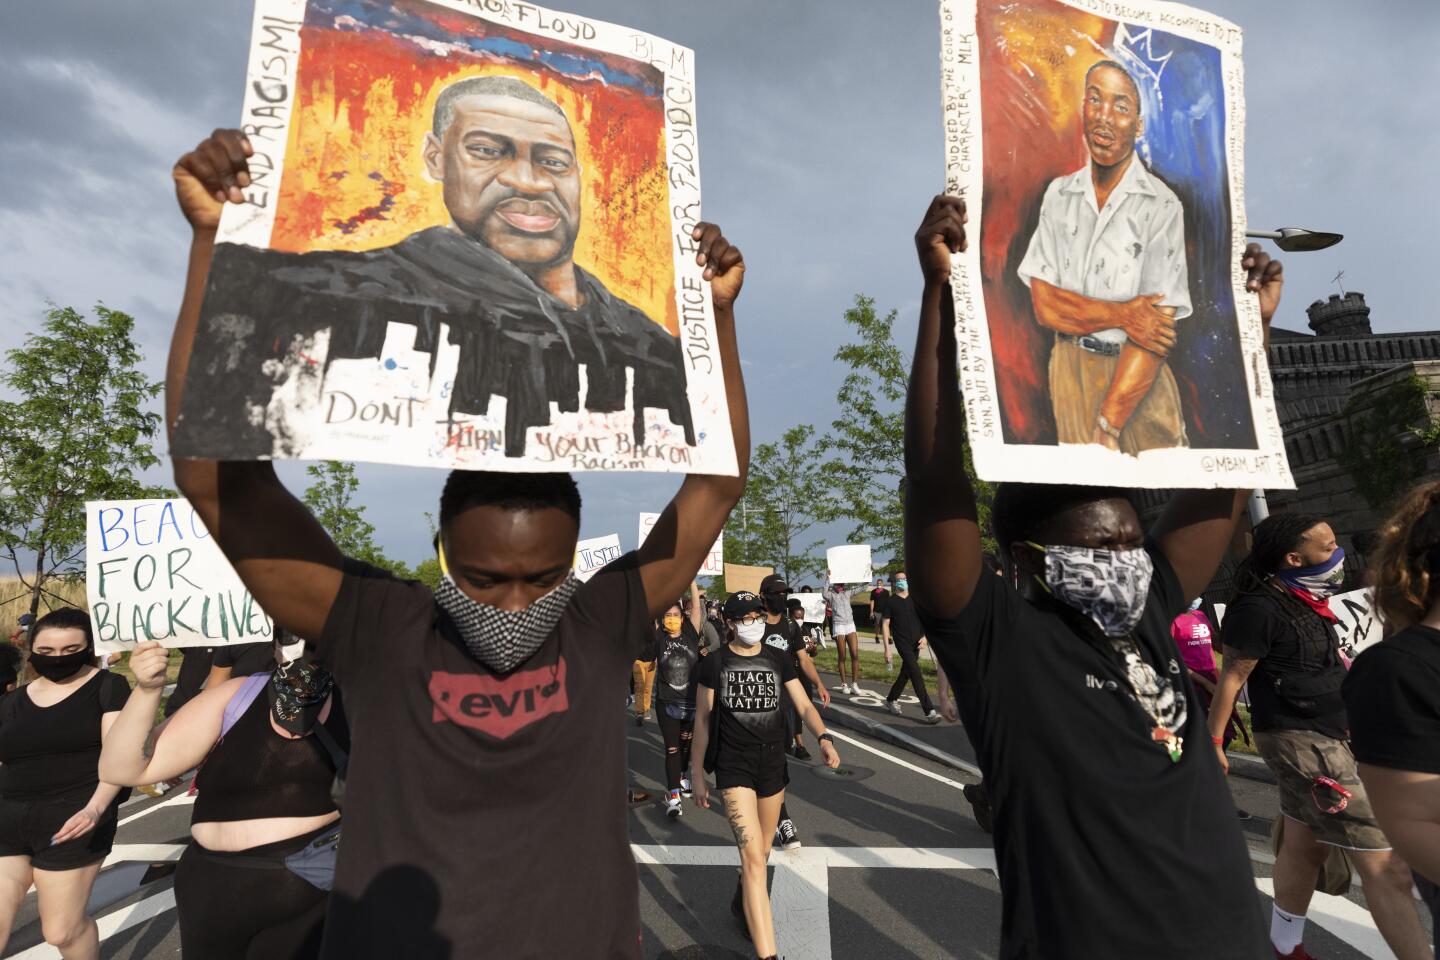 Demonstrators march during a protest in Boston against police brutality, Saturday.